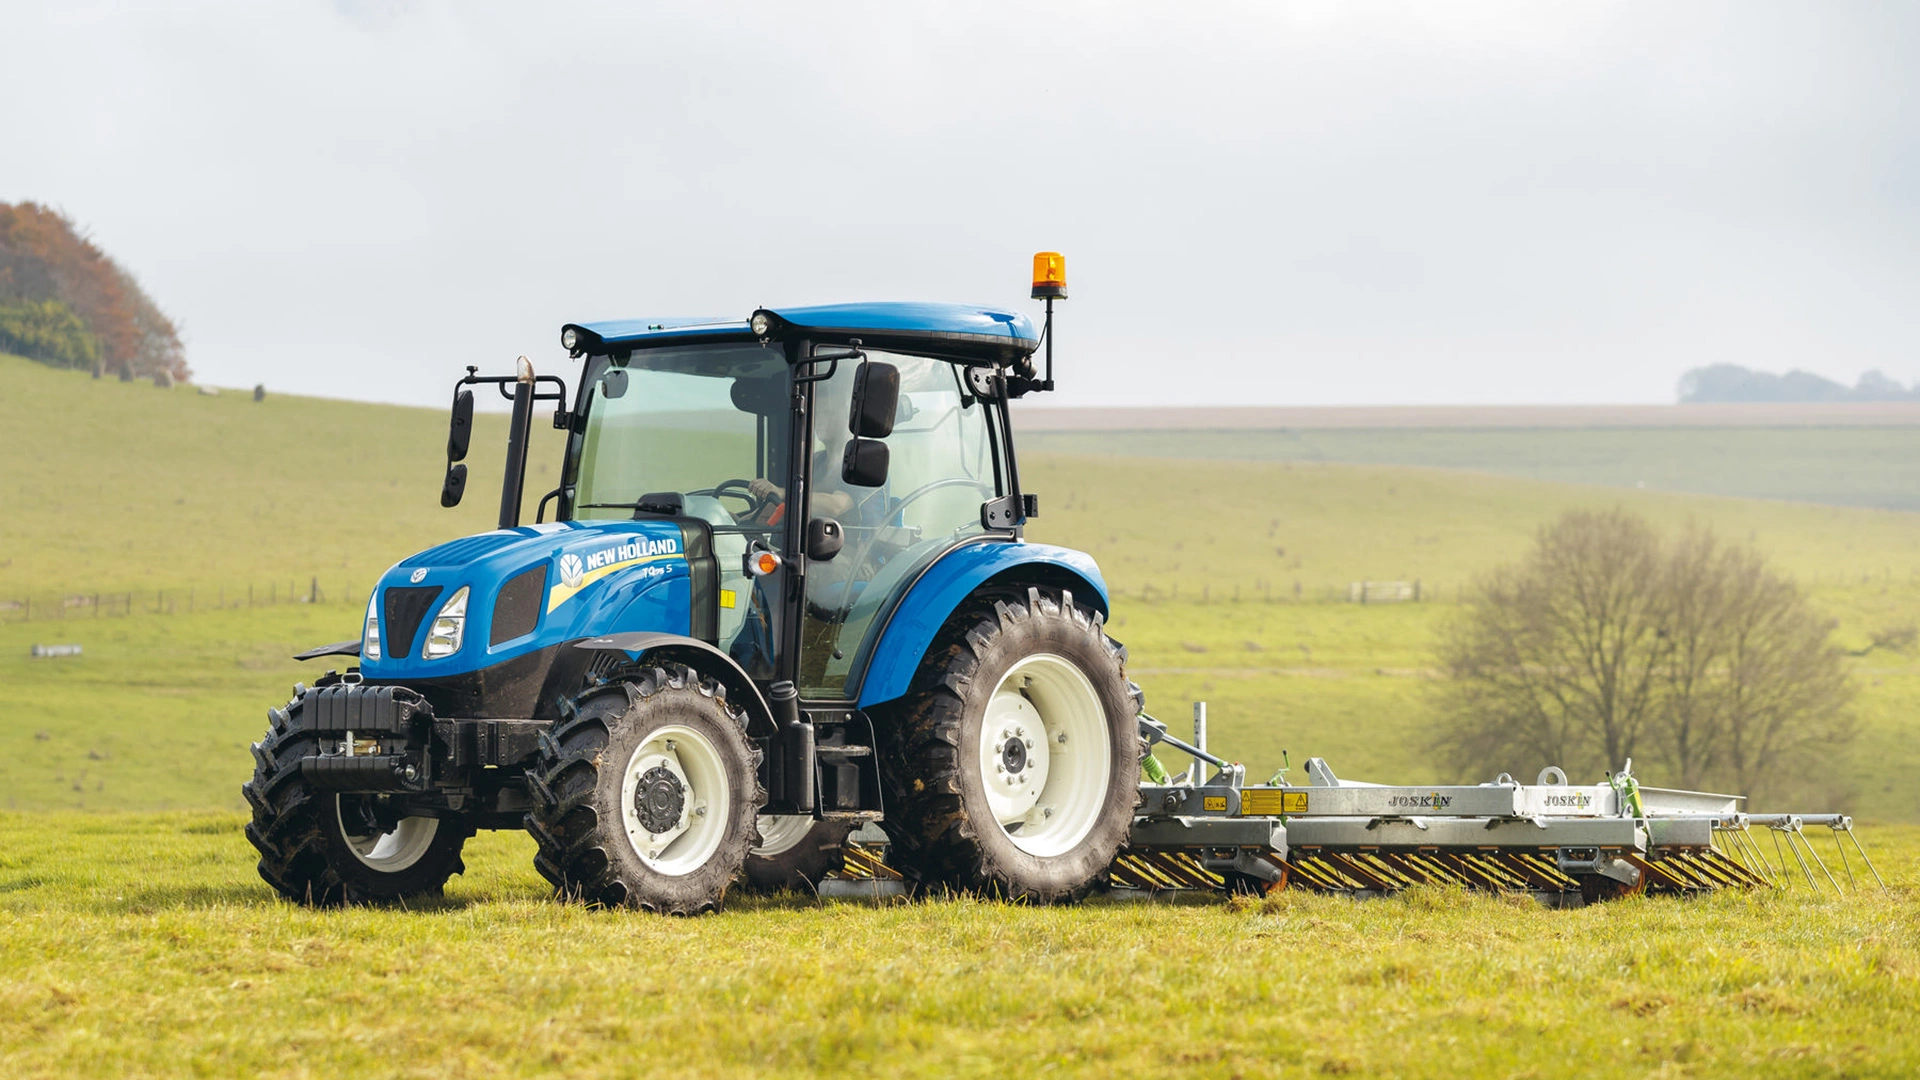 New Holland T4S agricultural tractor diligently working on the field